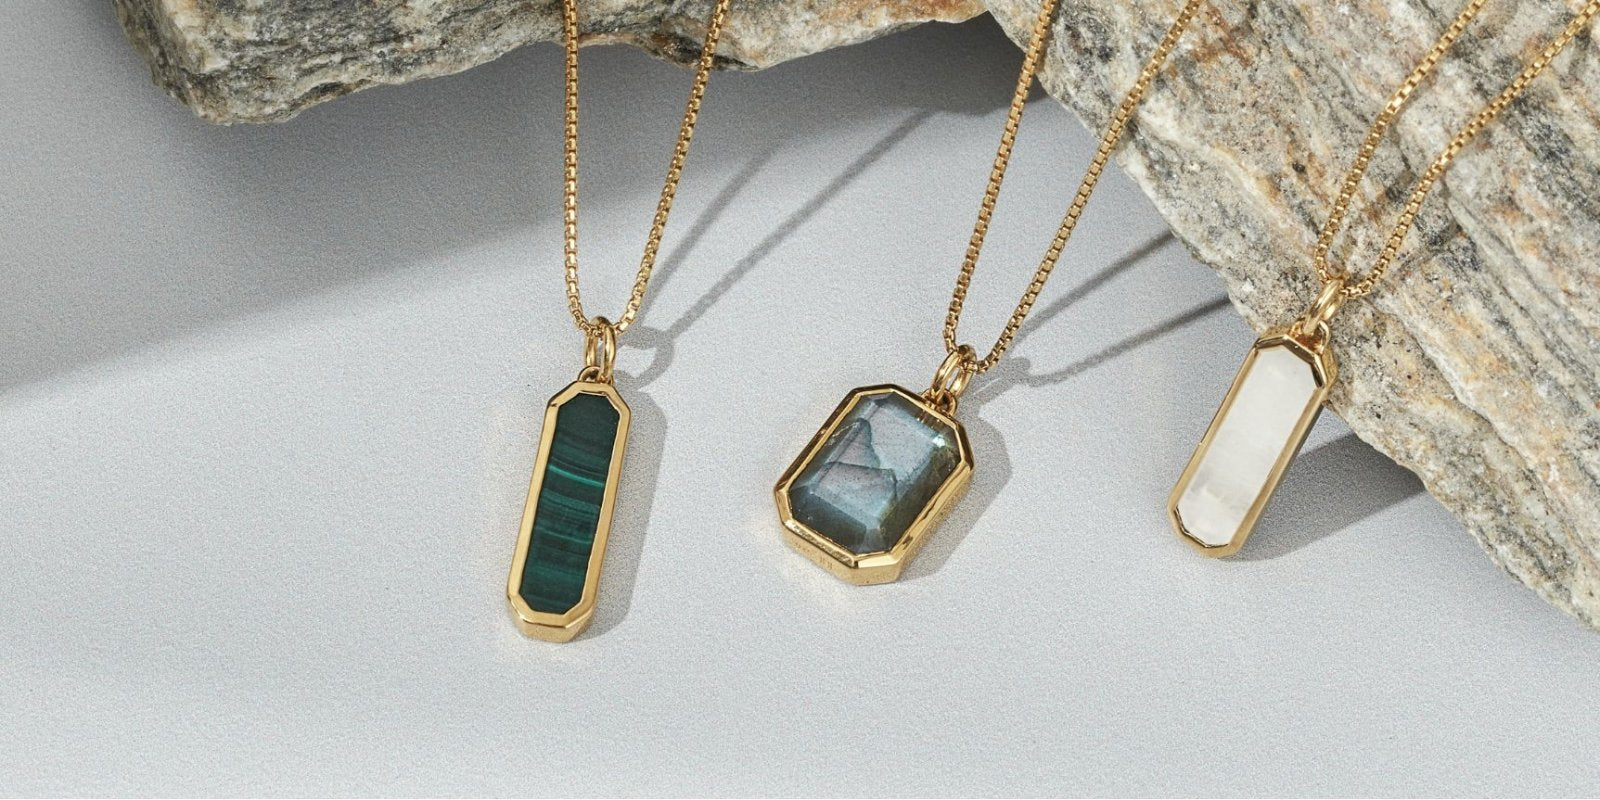 SILVER NECKLACES - 18k Gold & Recycled Silver gemstone jewellery